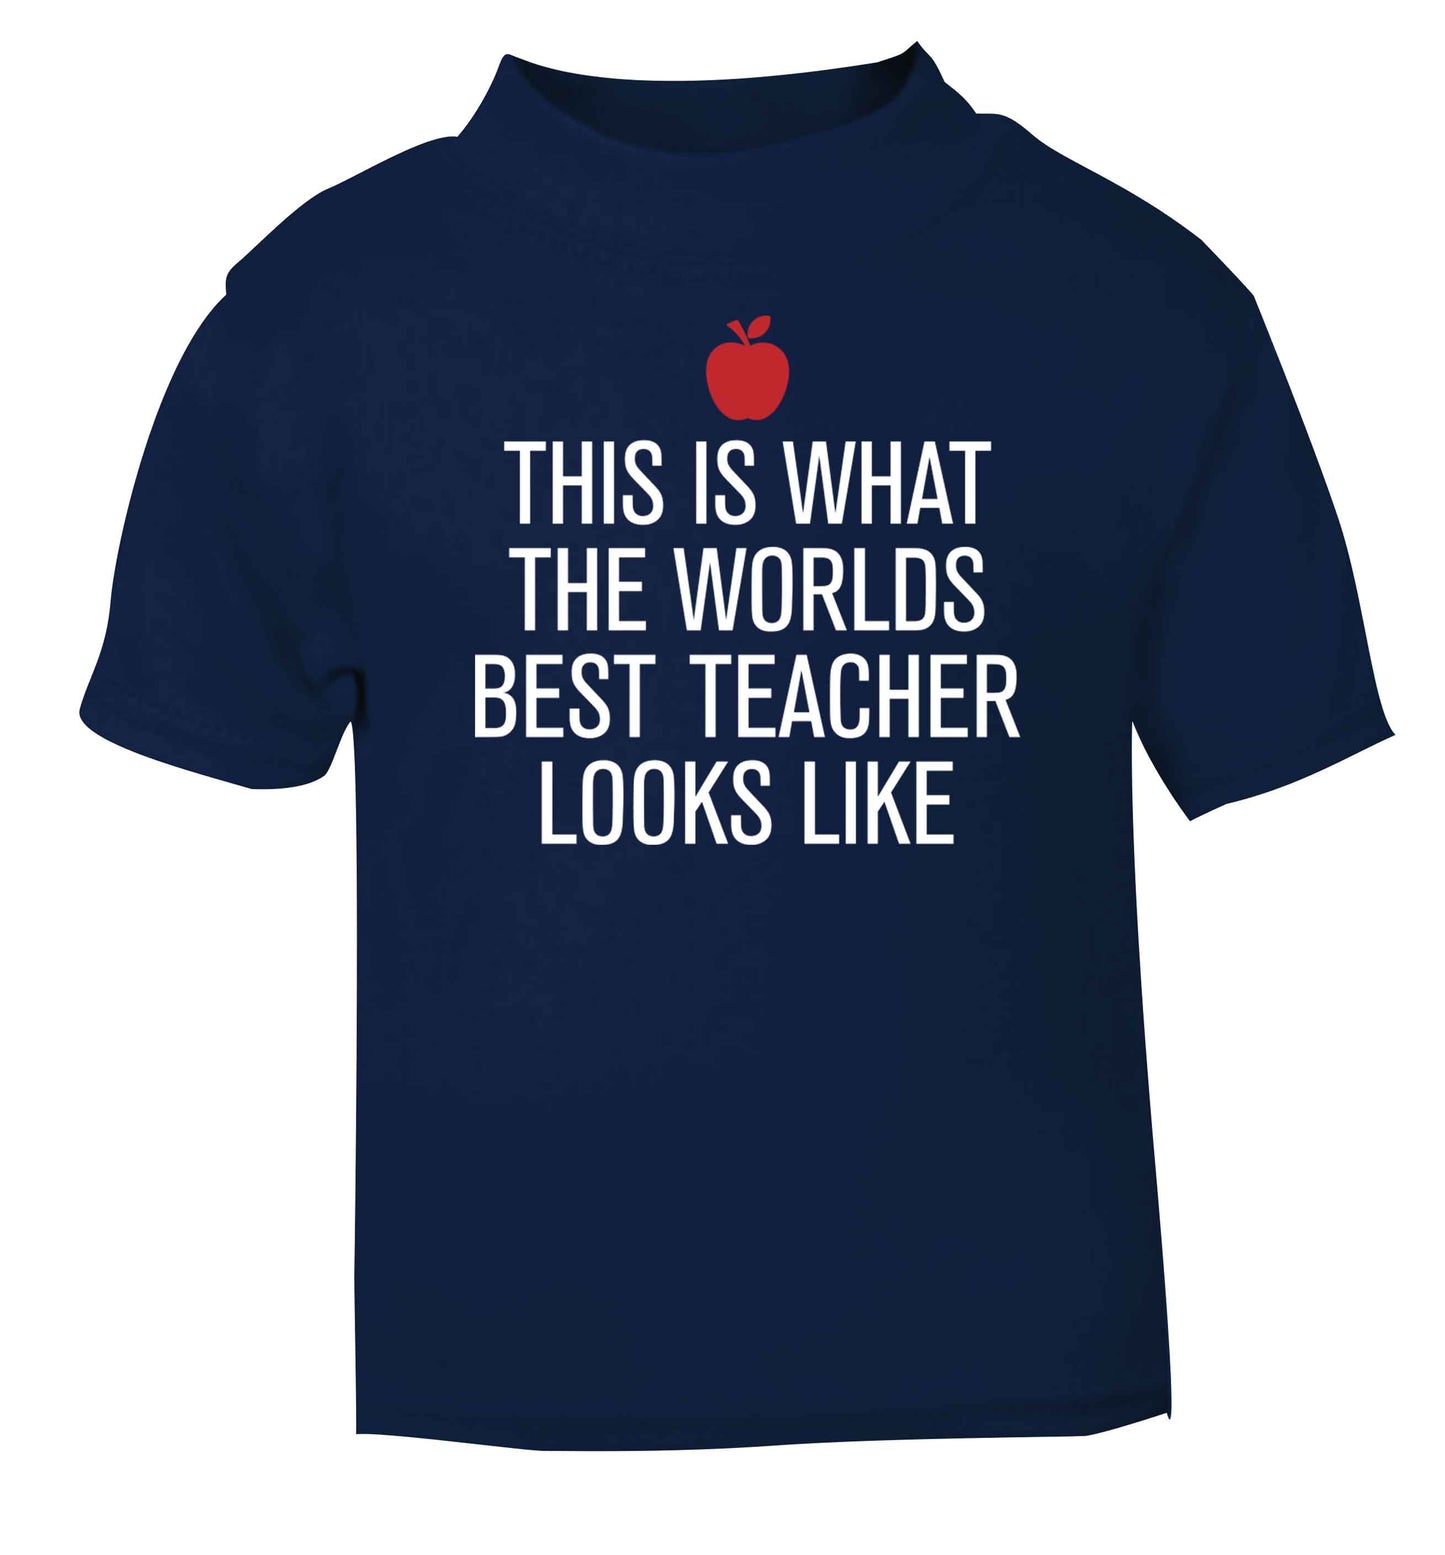 This is what the worlds best teacher looks like navy baby toddler Tshirt 2 Years